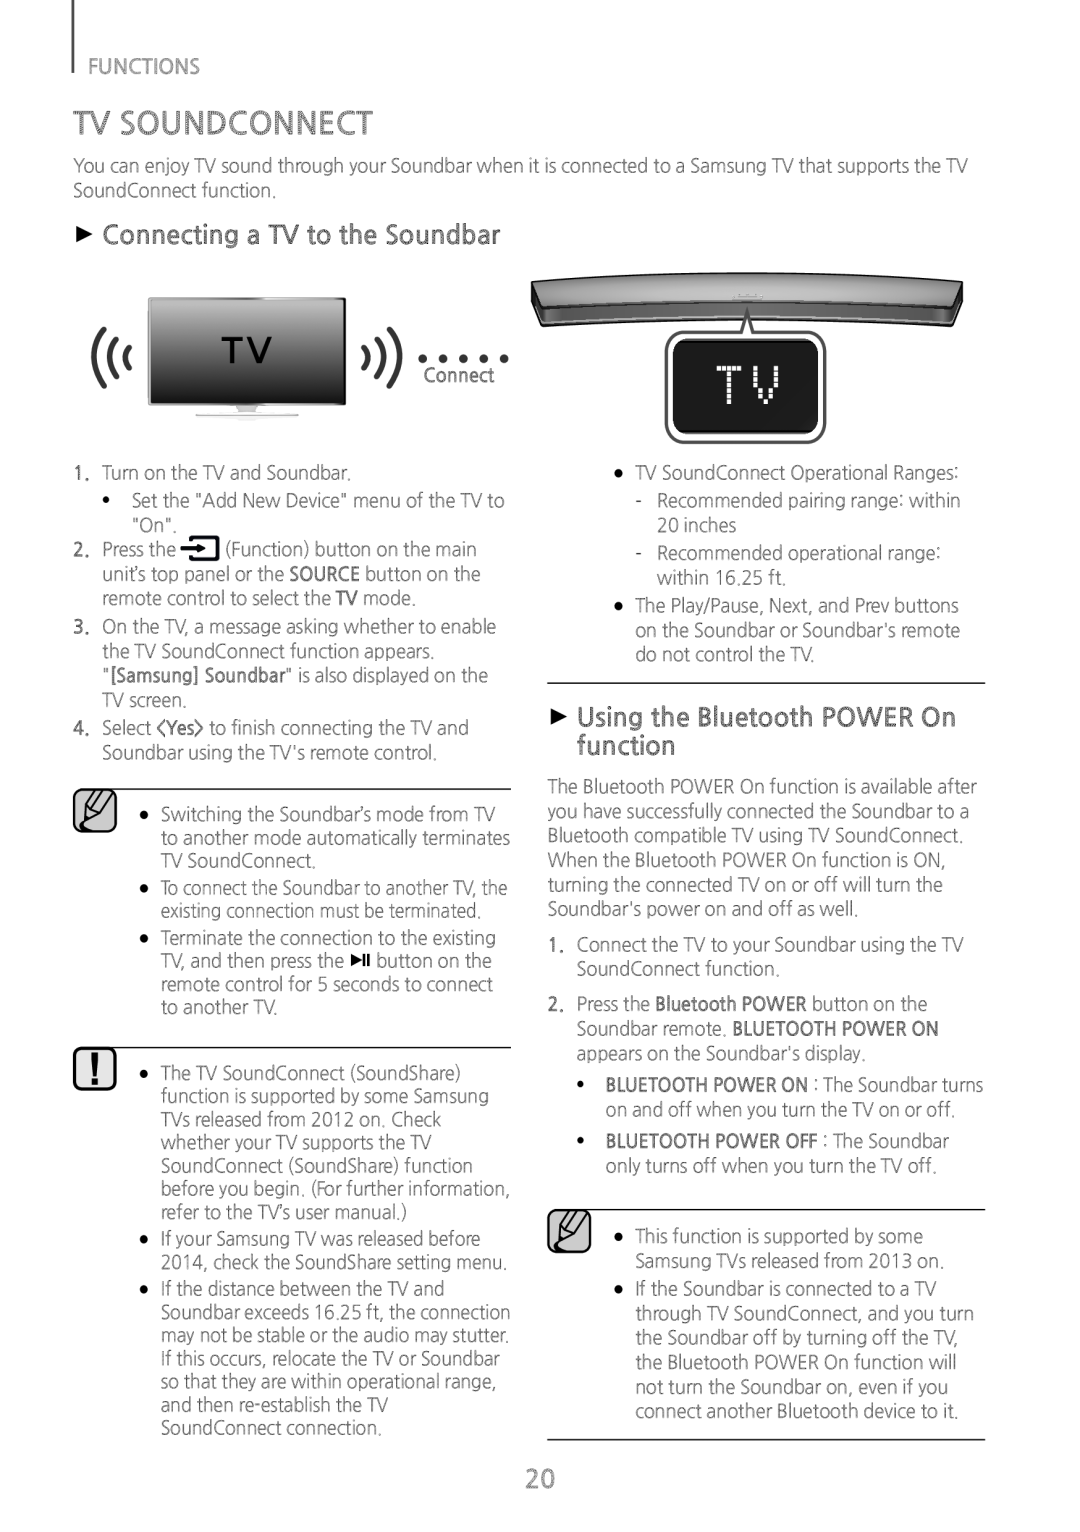 Samsung HWH7500 TV SoundConnect, ++Connecting a TV to the Soundbar, ++Using the Bluetooth POWER On function, Functions 